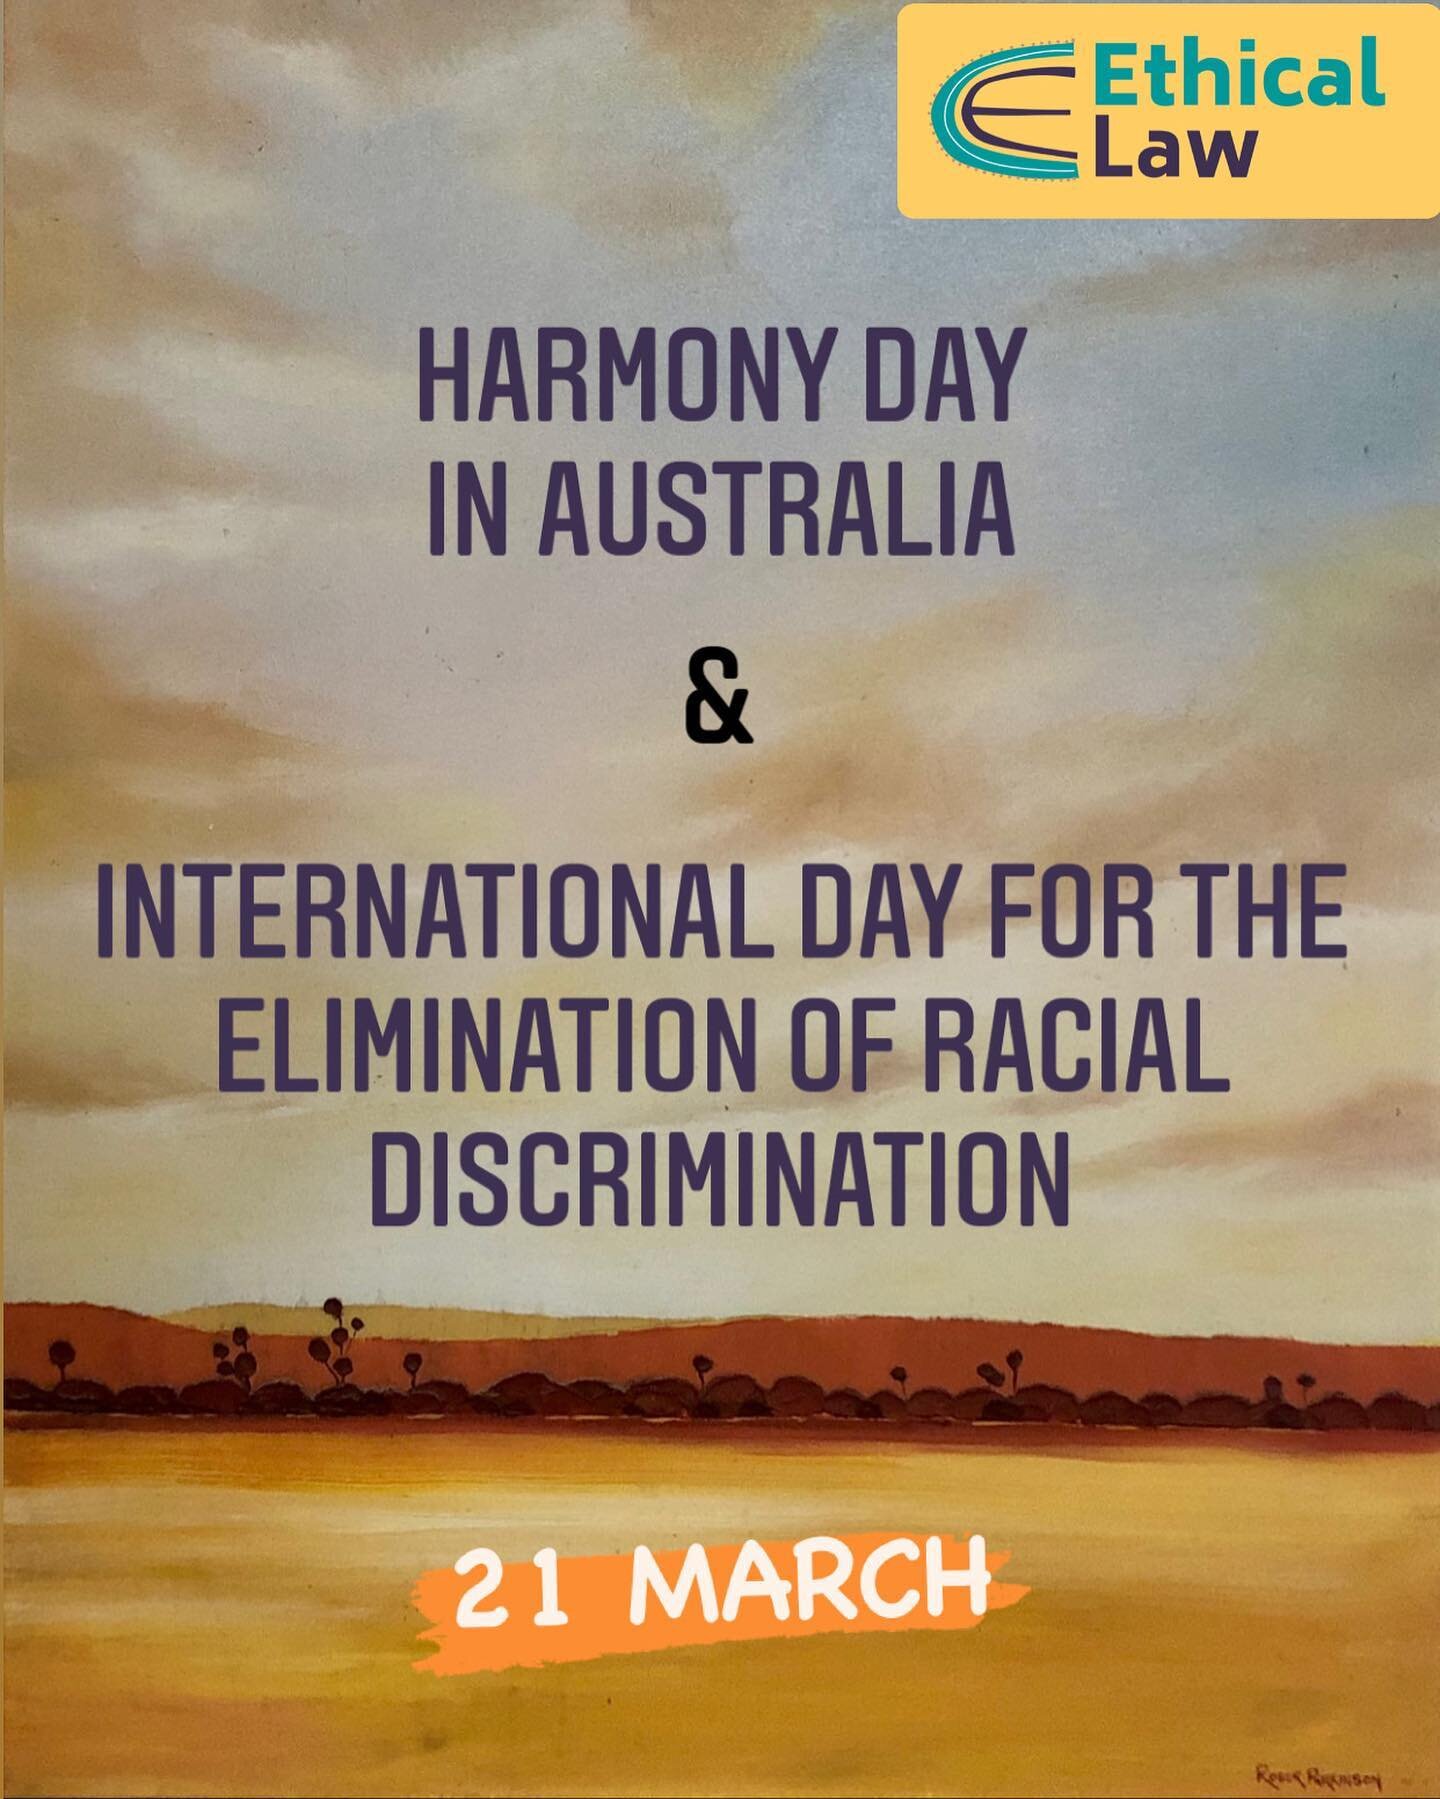 Today is Harmony Day in Australia, the last day of Harmony Week. 

&ldquo;Harmony Week is about inclusiveness, respect and belonging for all Australians, regardless of cultural or linguistic background, united by a set of core Australian values.&rdqu